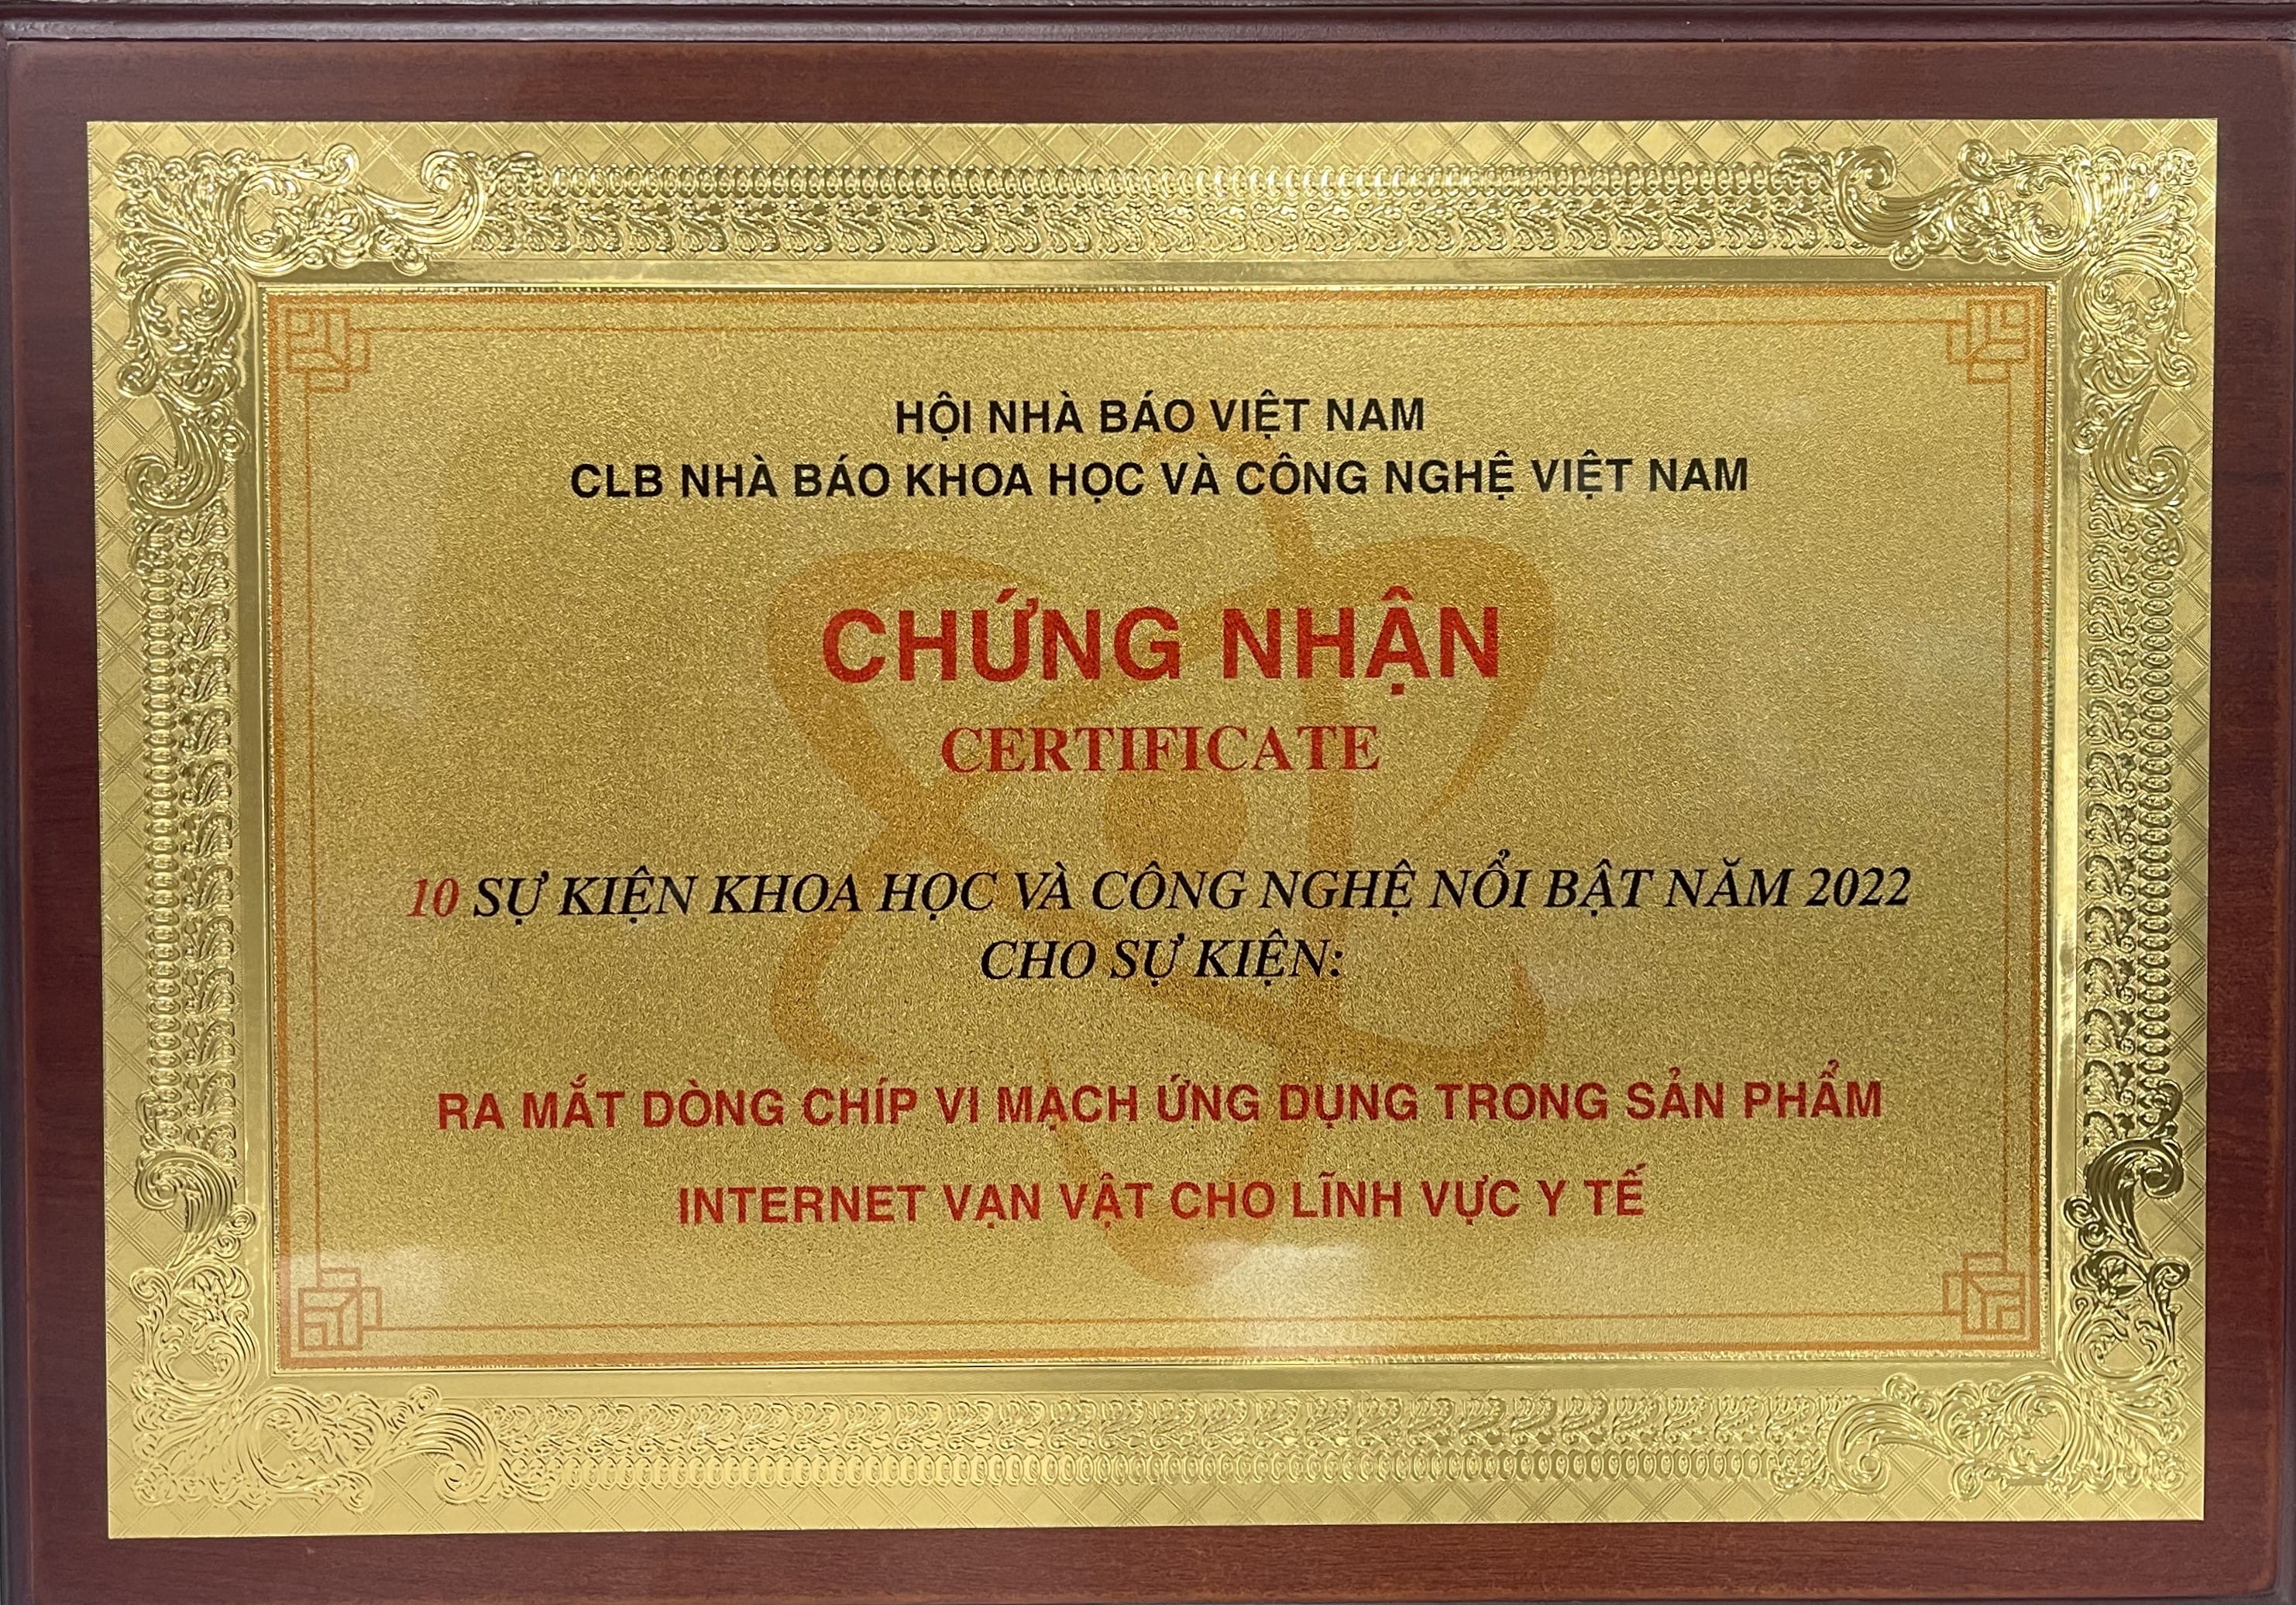 Certificate of Top 10 science and technology highlights in 2022, voted by the Vietnam Science and Technology Journalists Club